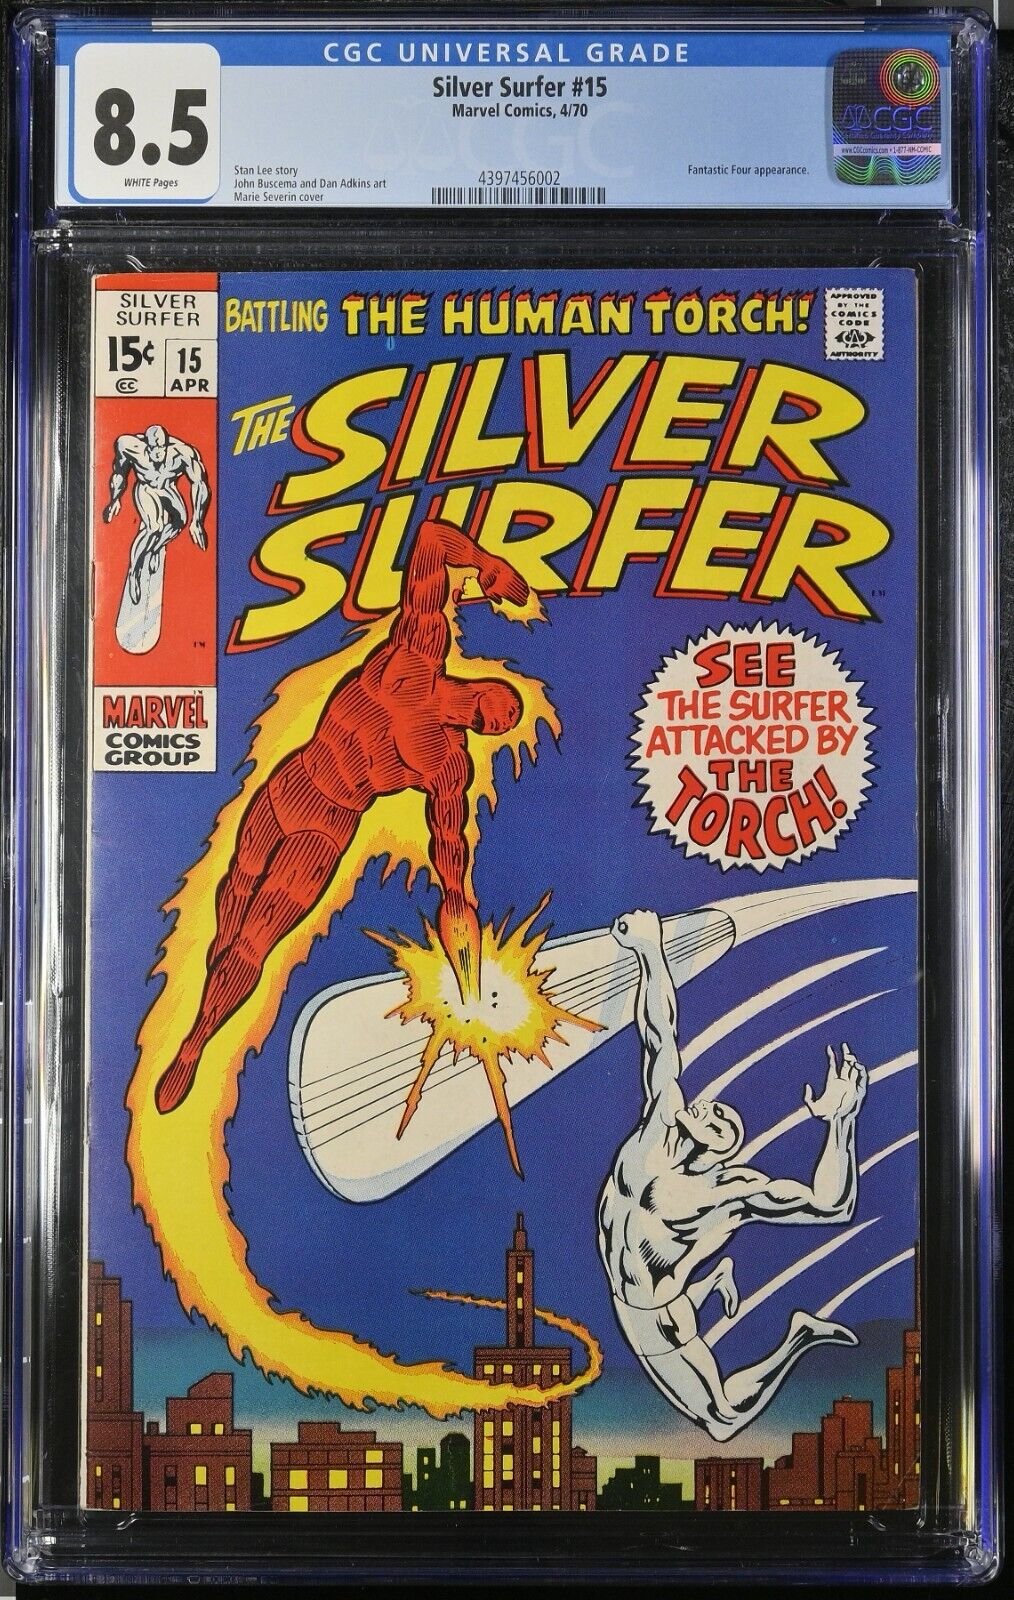 SILVER SURFER #15 (1970) CGC 8.5 WHITE HUMAN TORCH APPEARANCE MARVEL COMICS